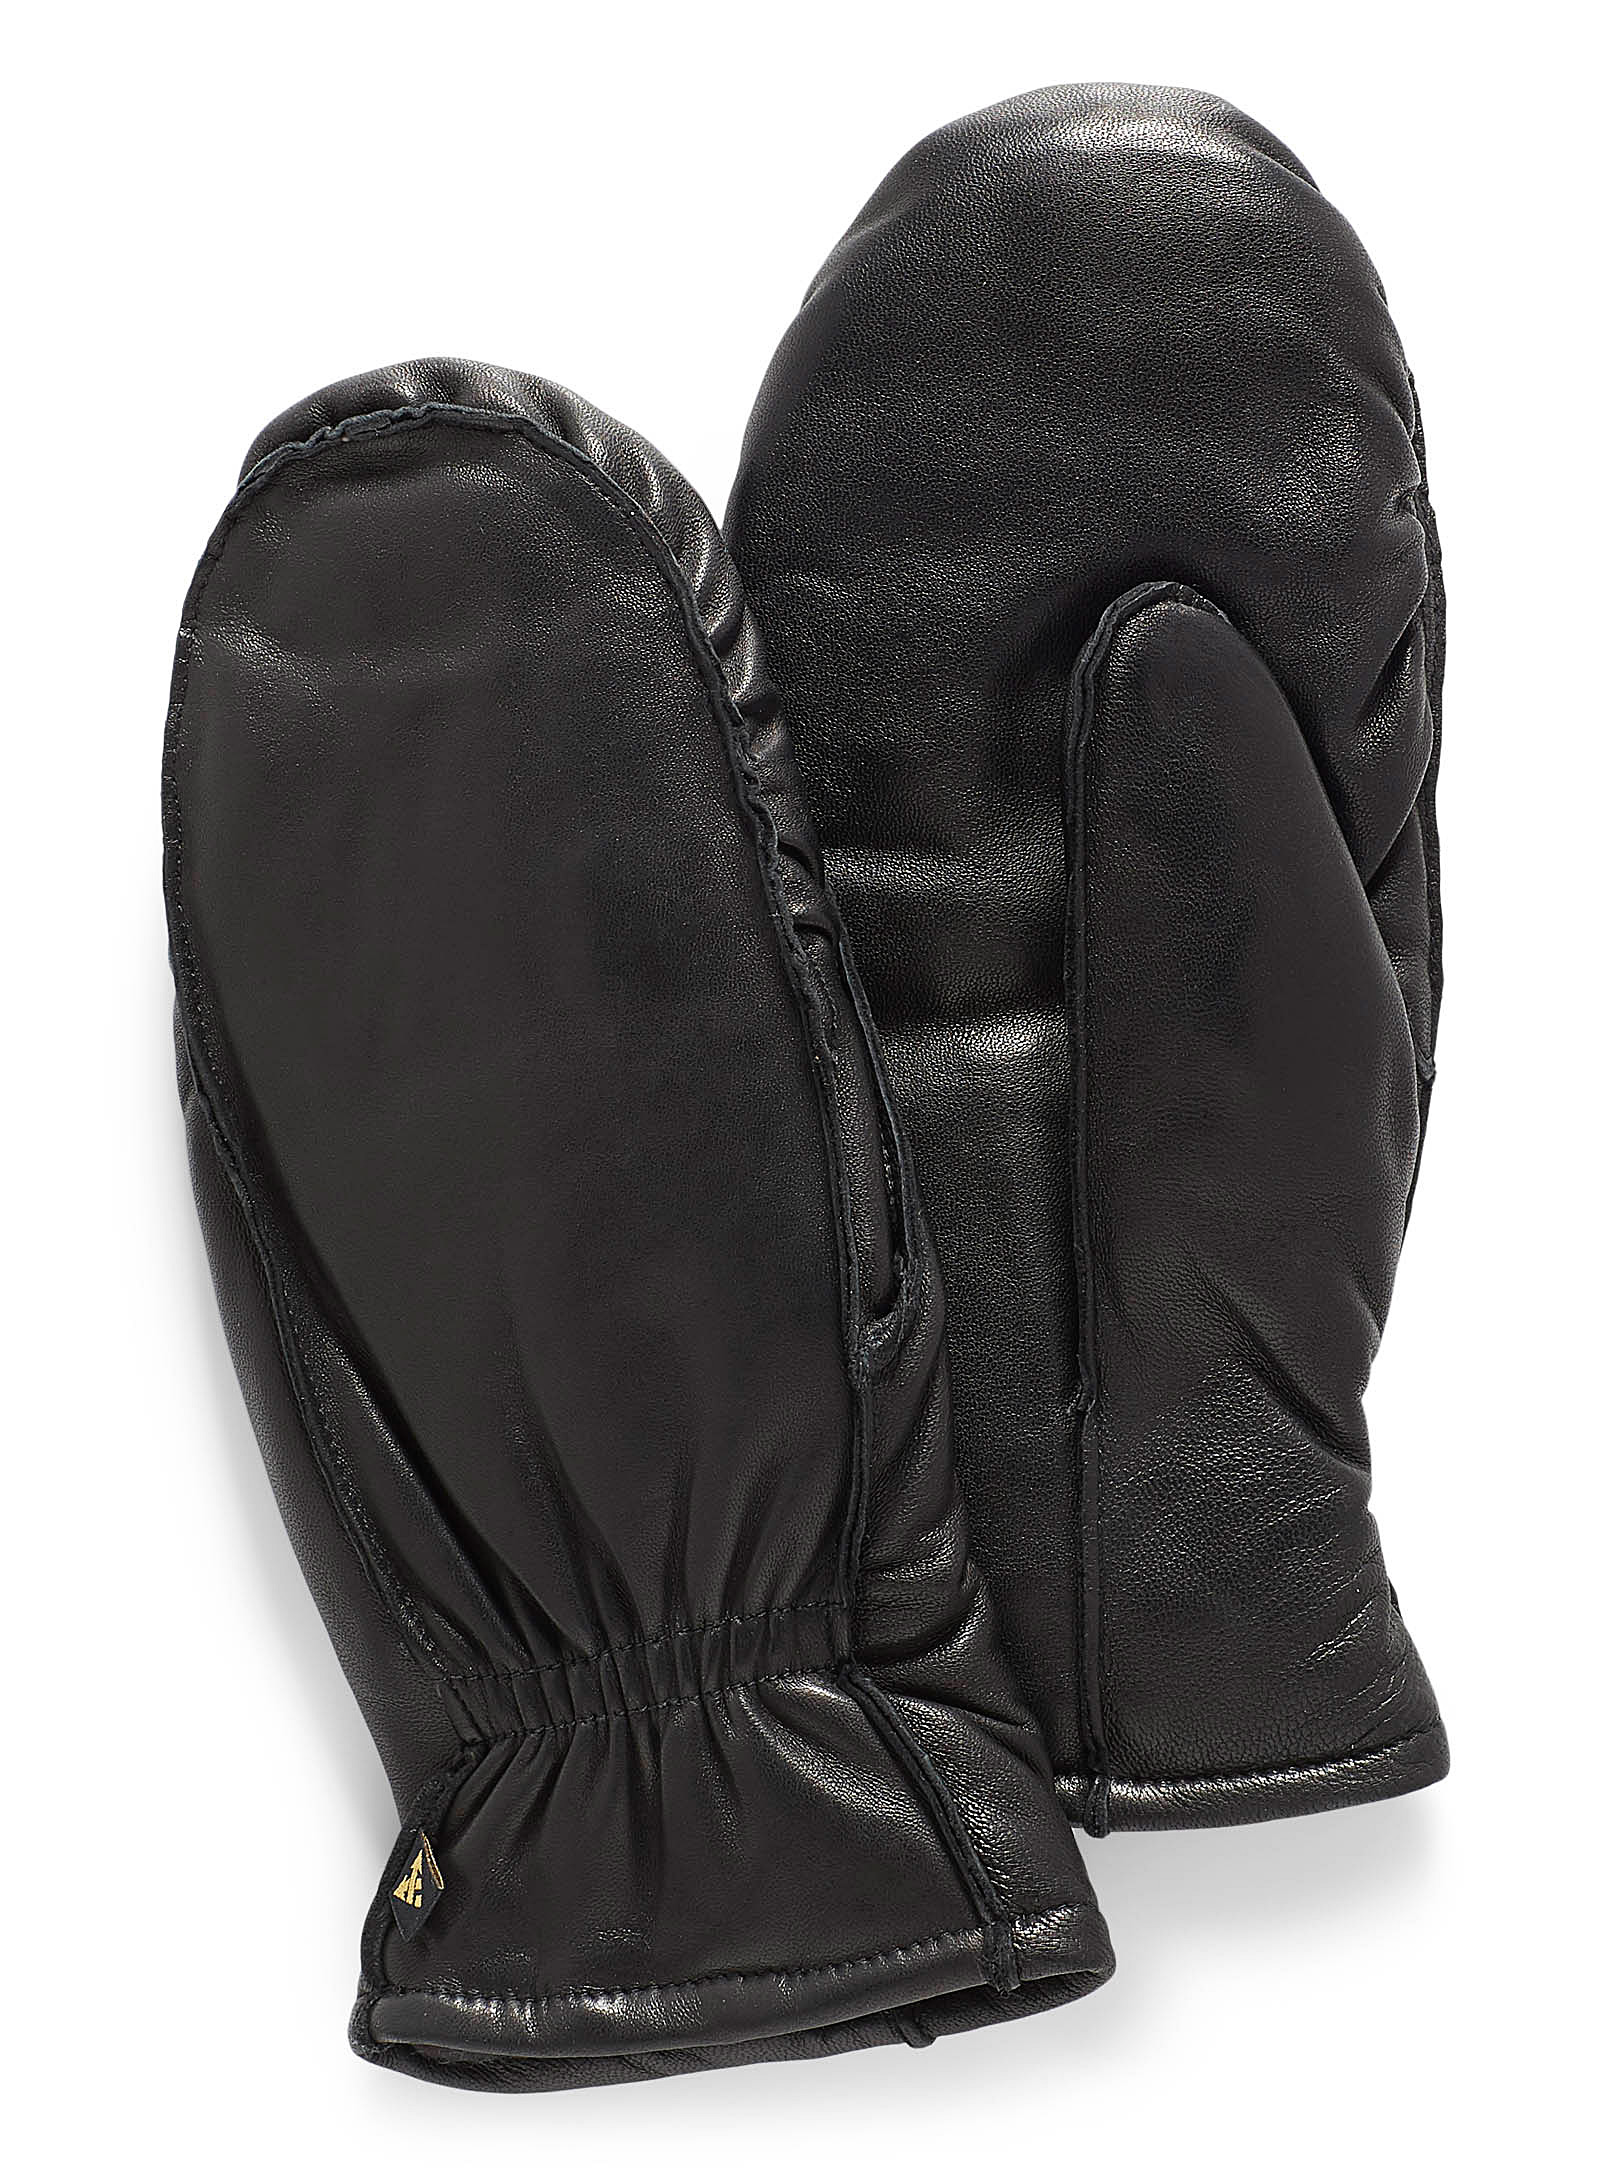 Auclair Built-in Glove Leather Mittens In Black